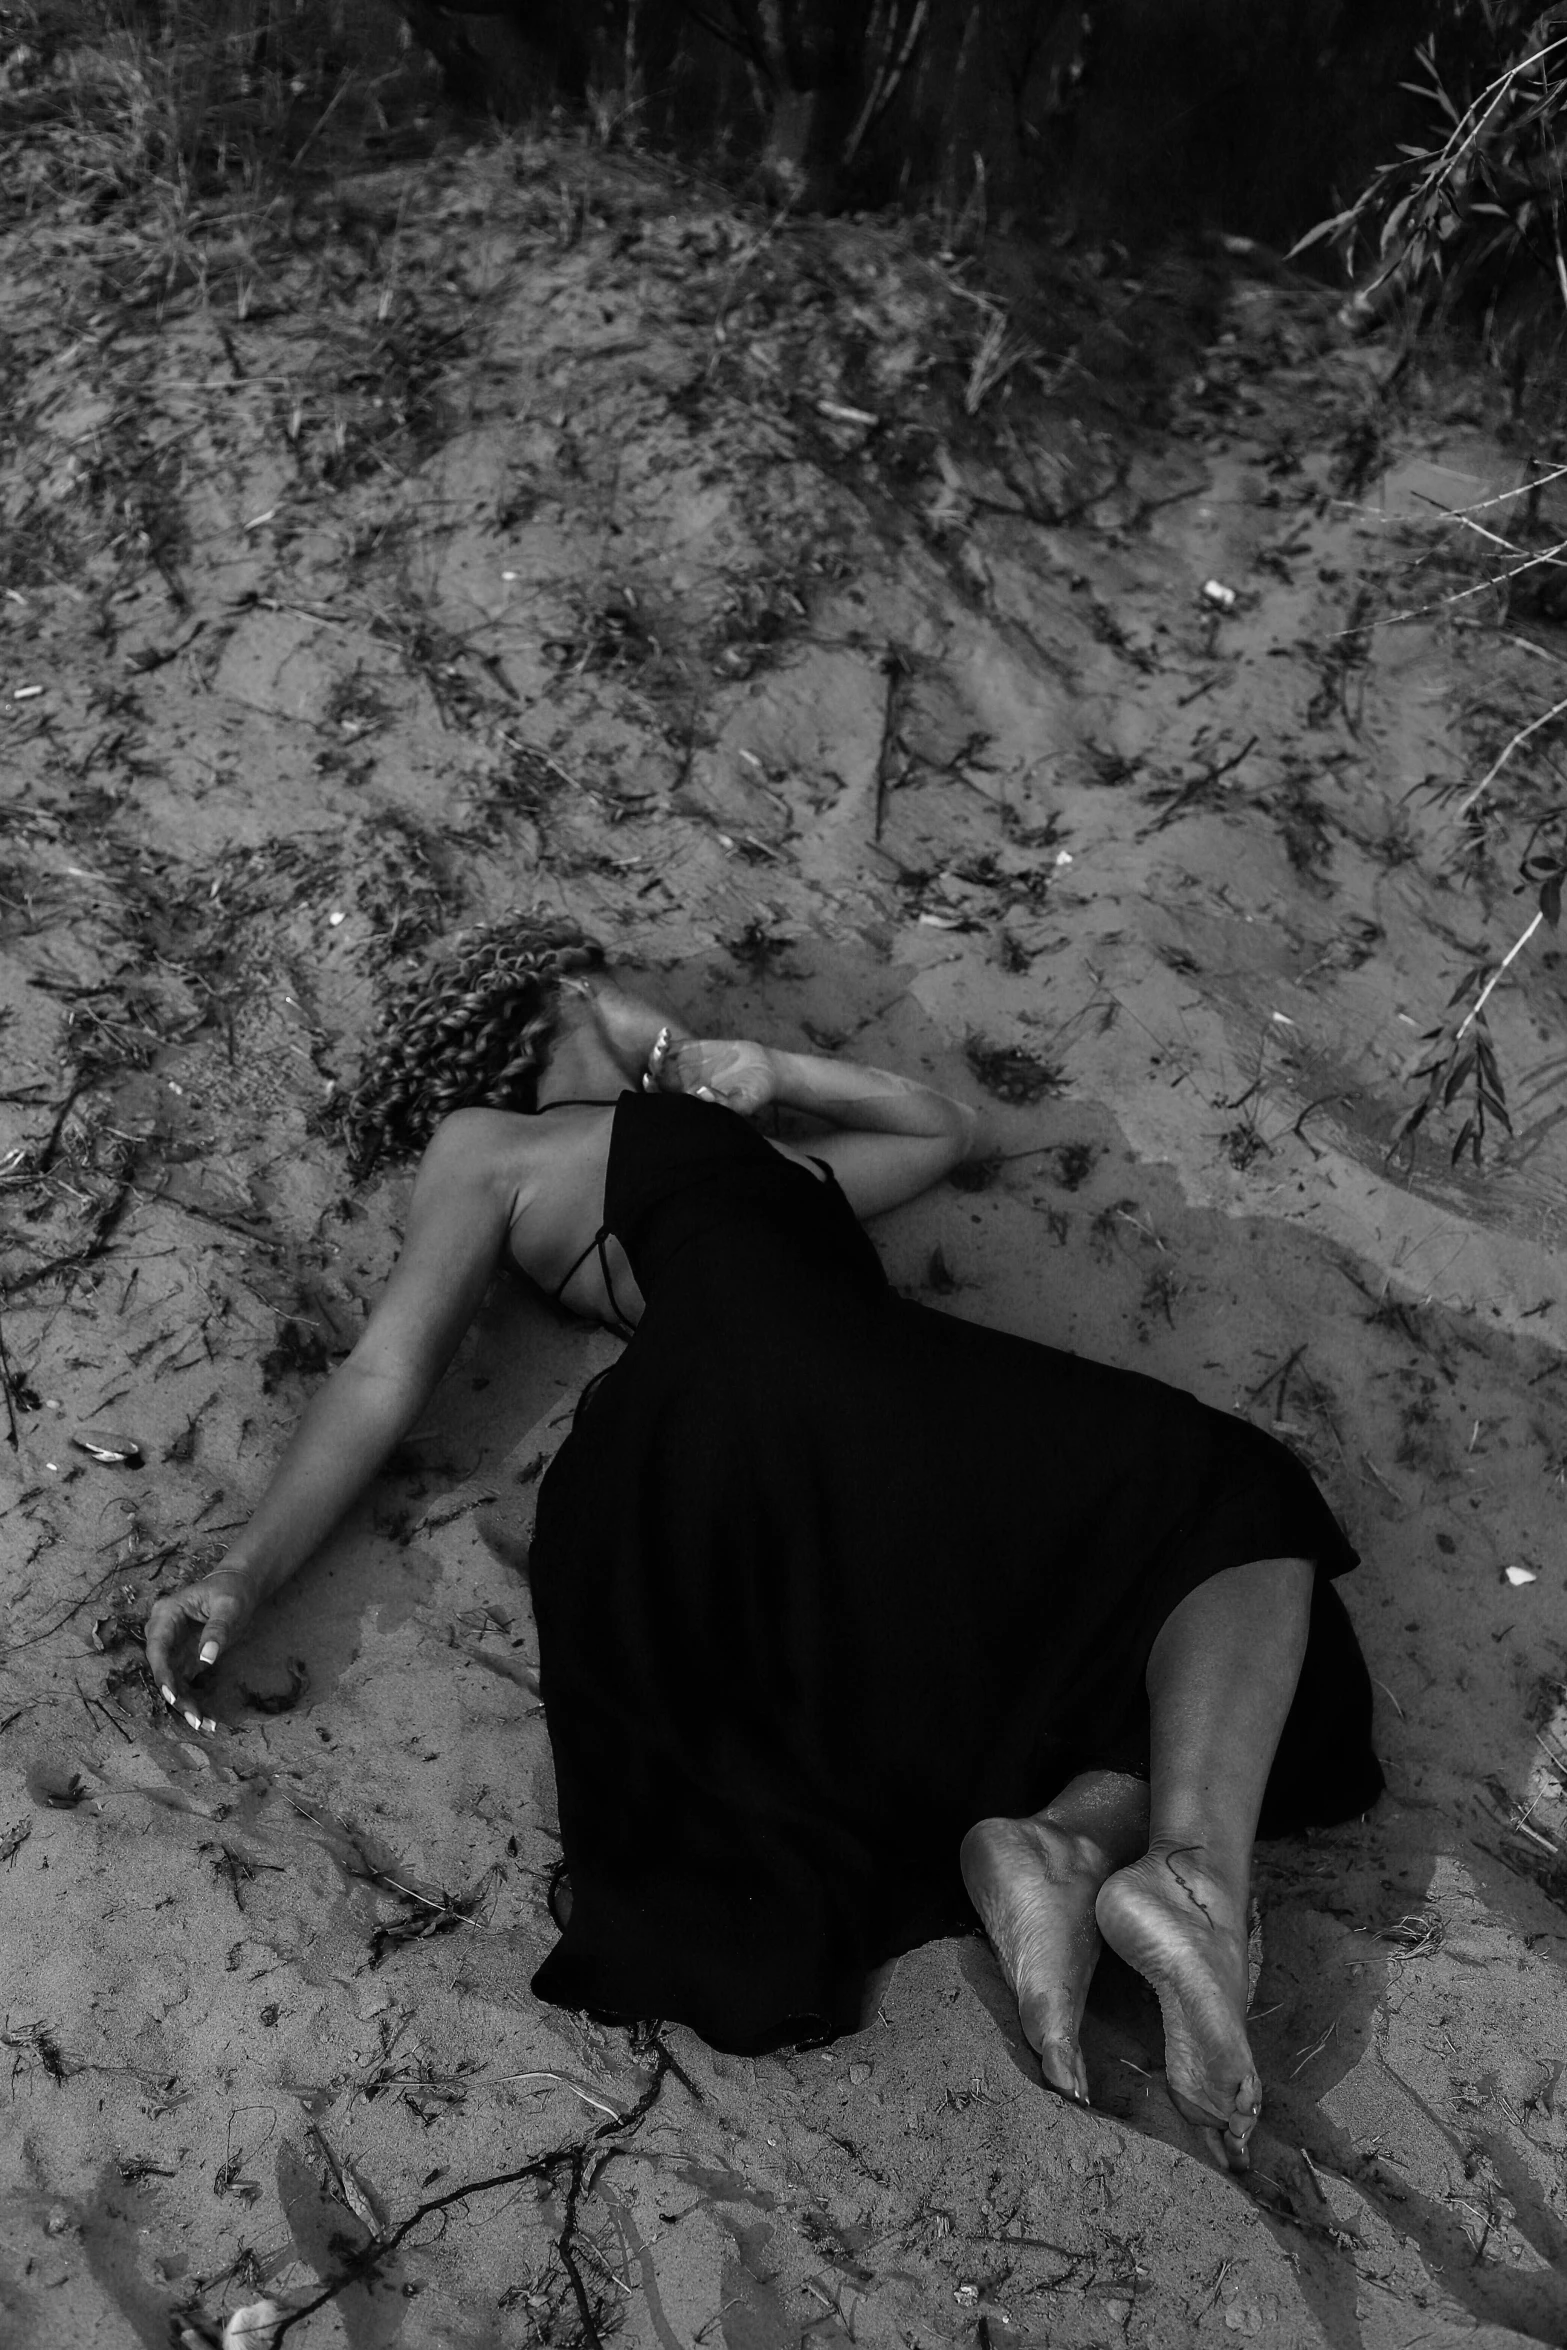 a black and white photo of a woman laying in the sand, tumblr, conceptual art, homicide, southern gothic, photograph taken in 2 0 2 0, heartbroken